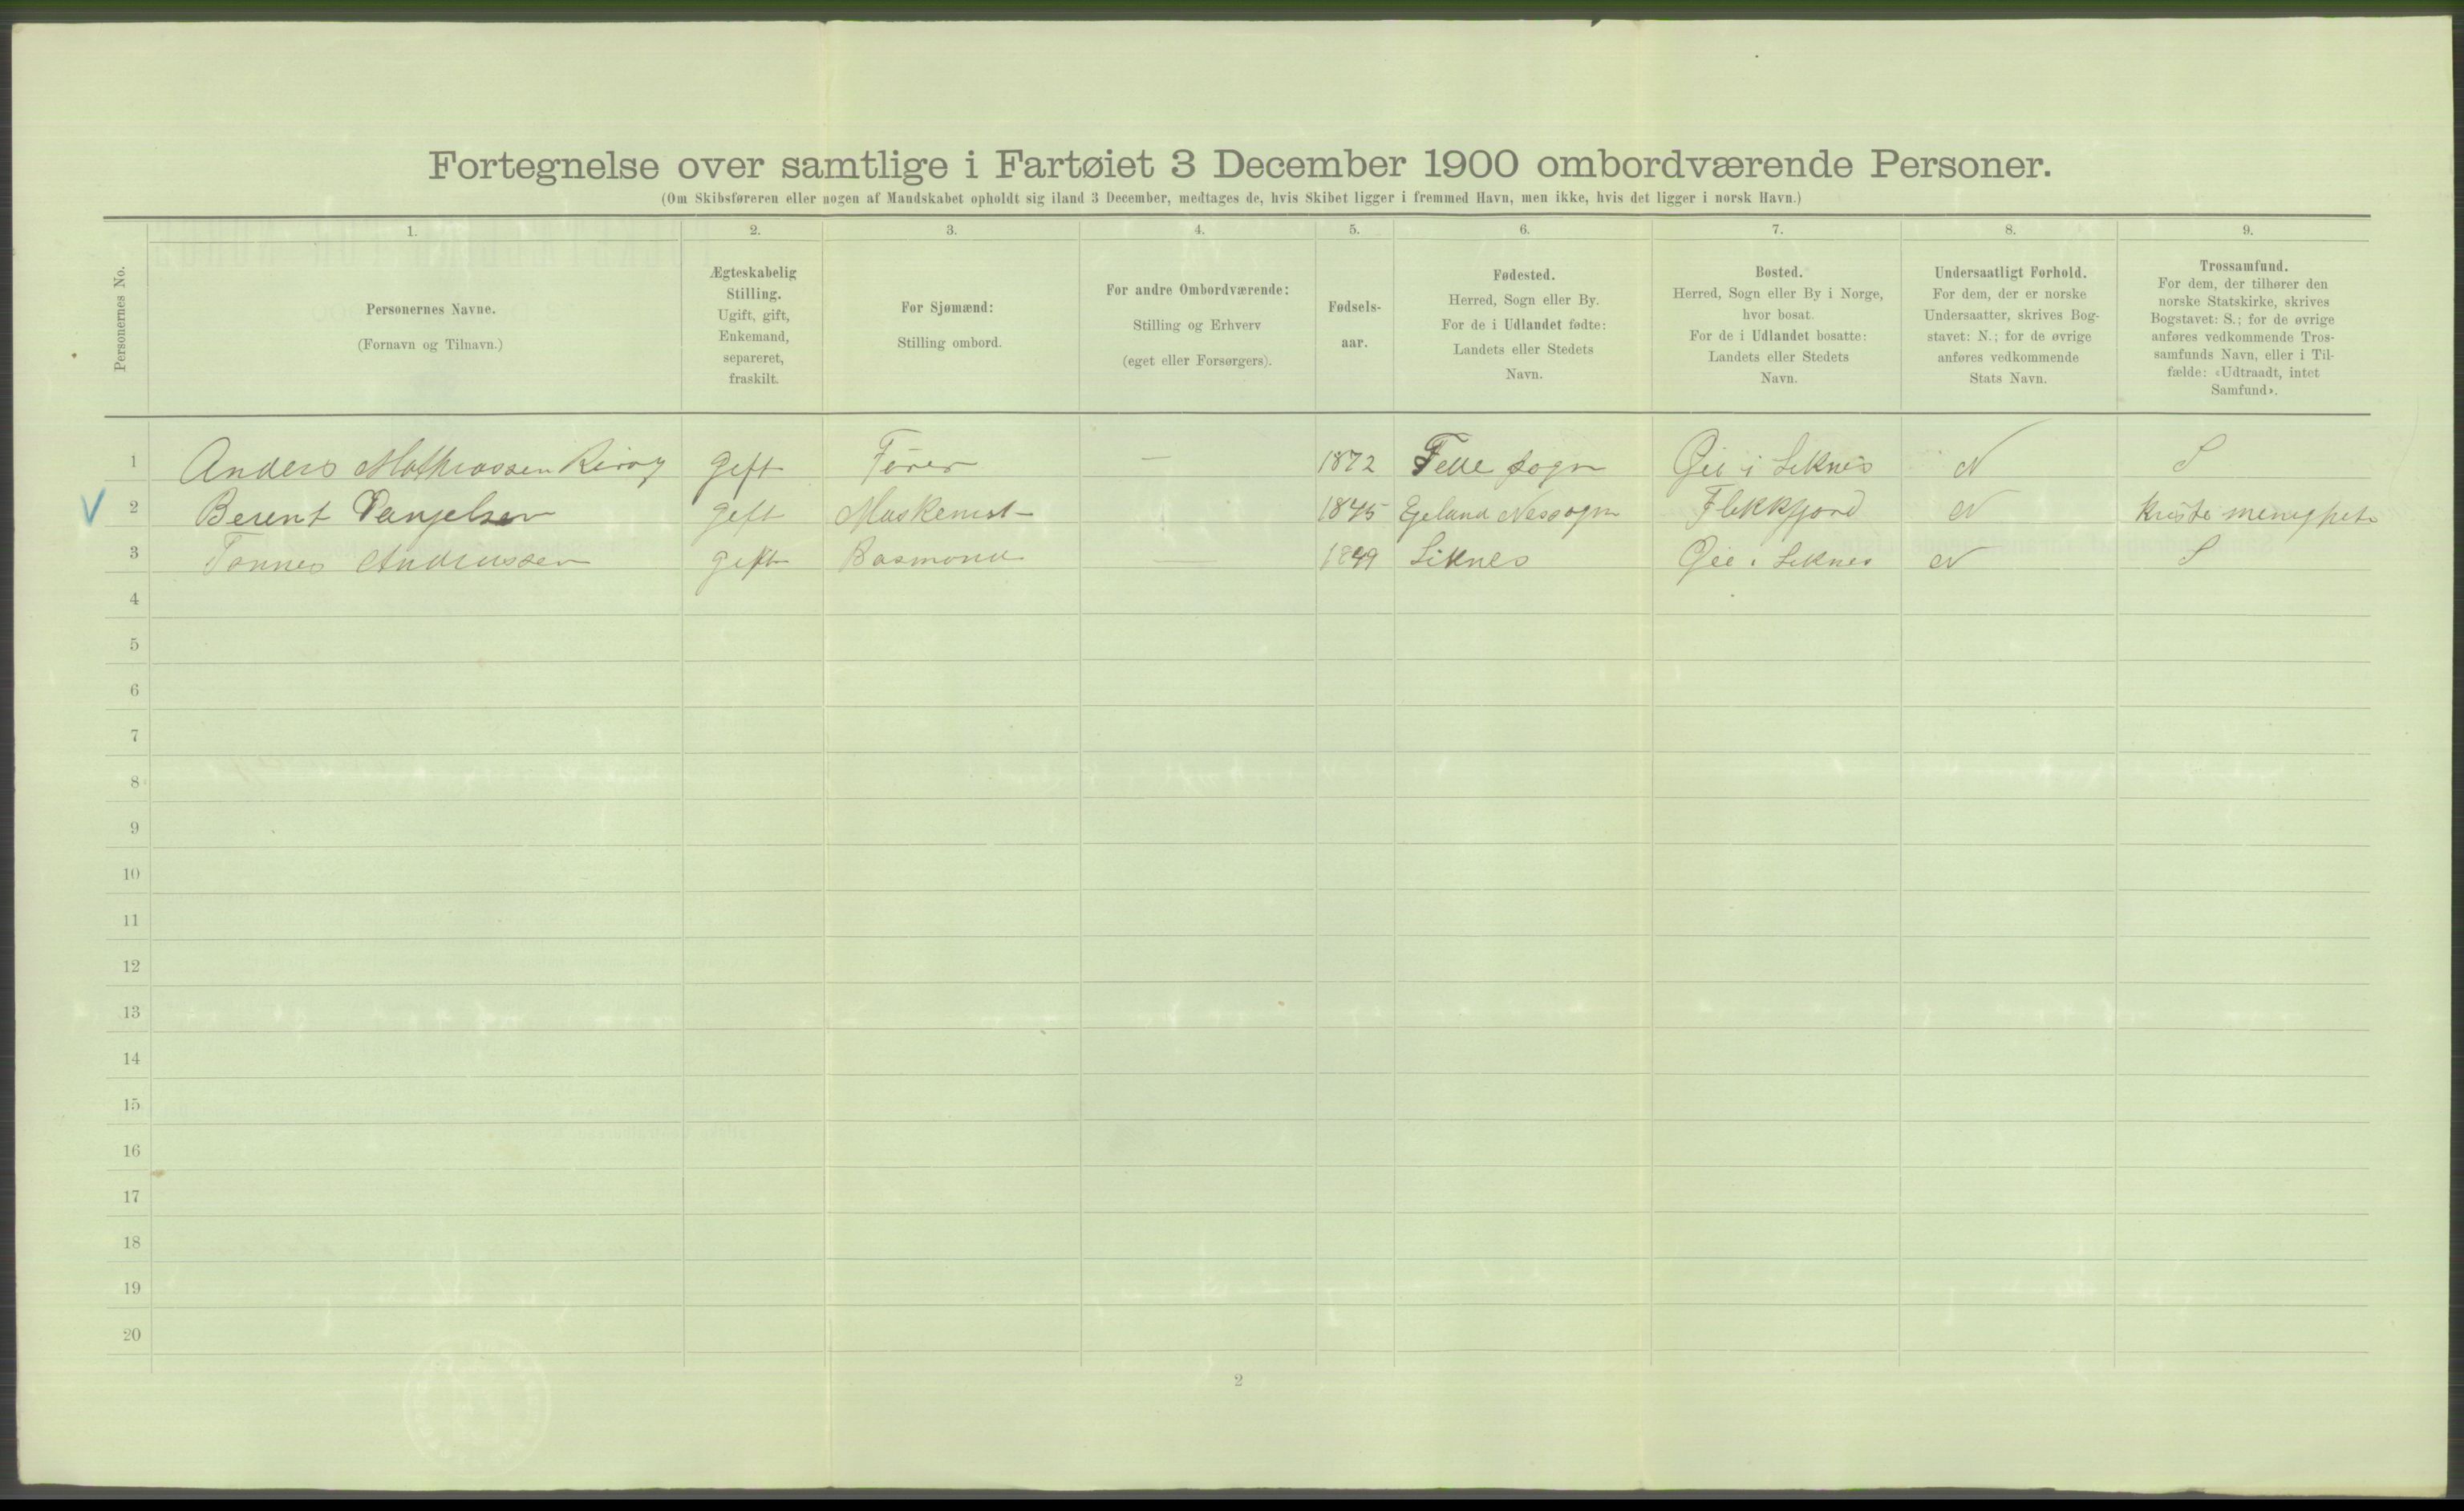 RA, 1900 Census - ship lists from ships in Norwegian harbours, harbours abroad and at sea, 1900, p. 828